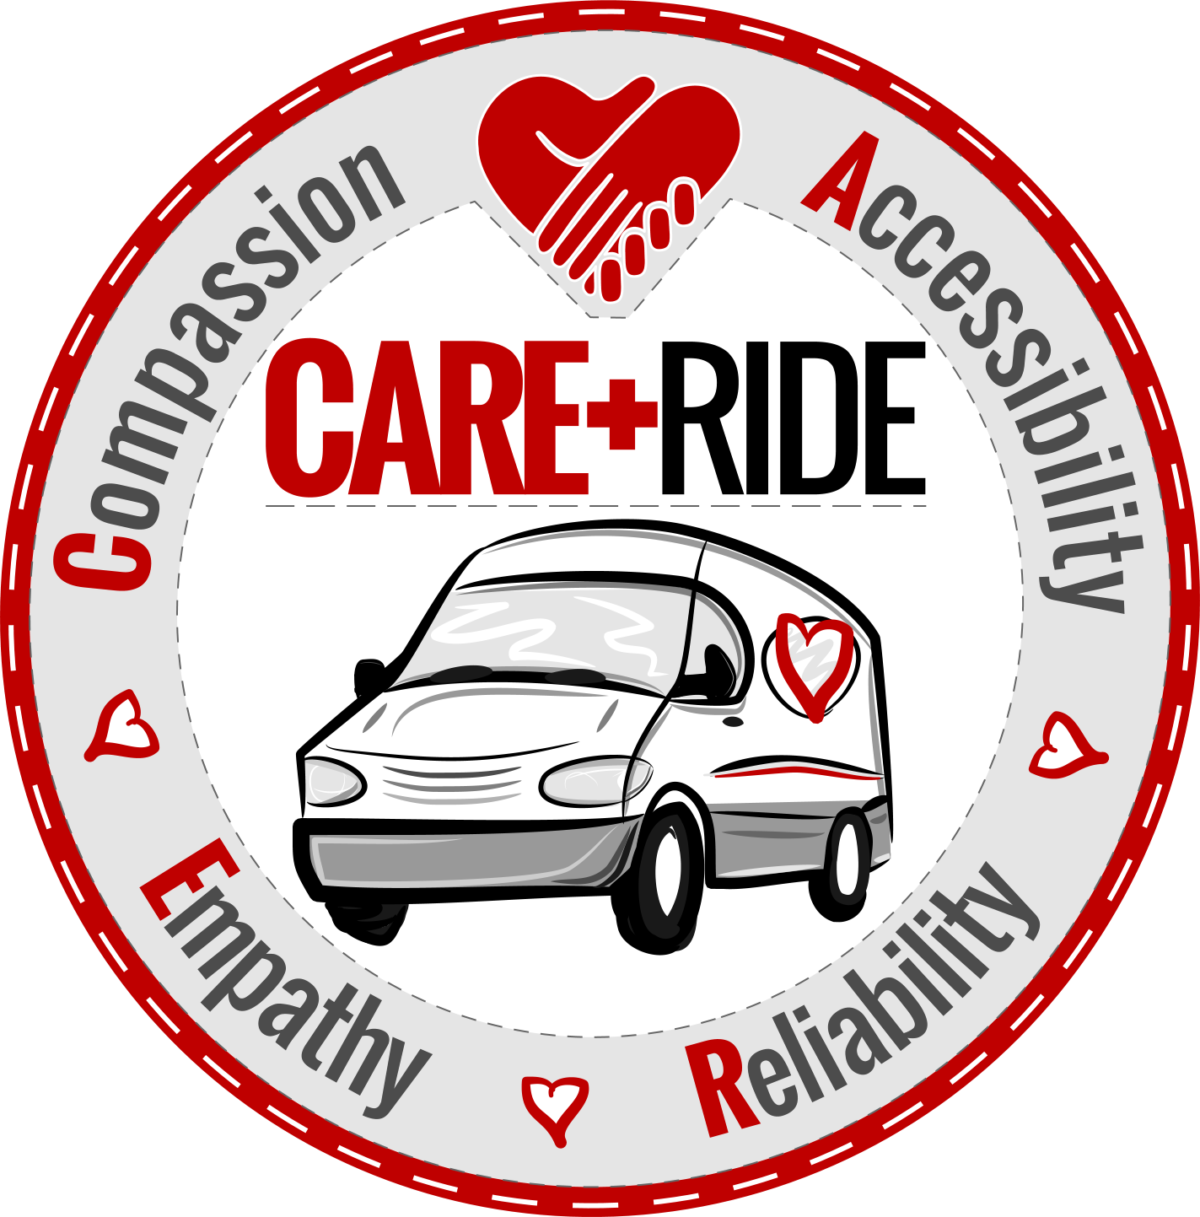 CARE RIDE LOGO - ROUND PATCH GRAY-WHITE 1450px